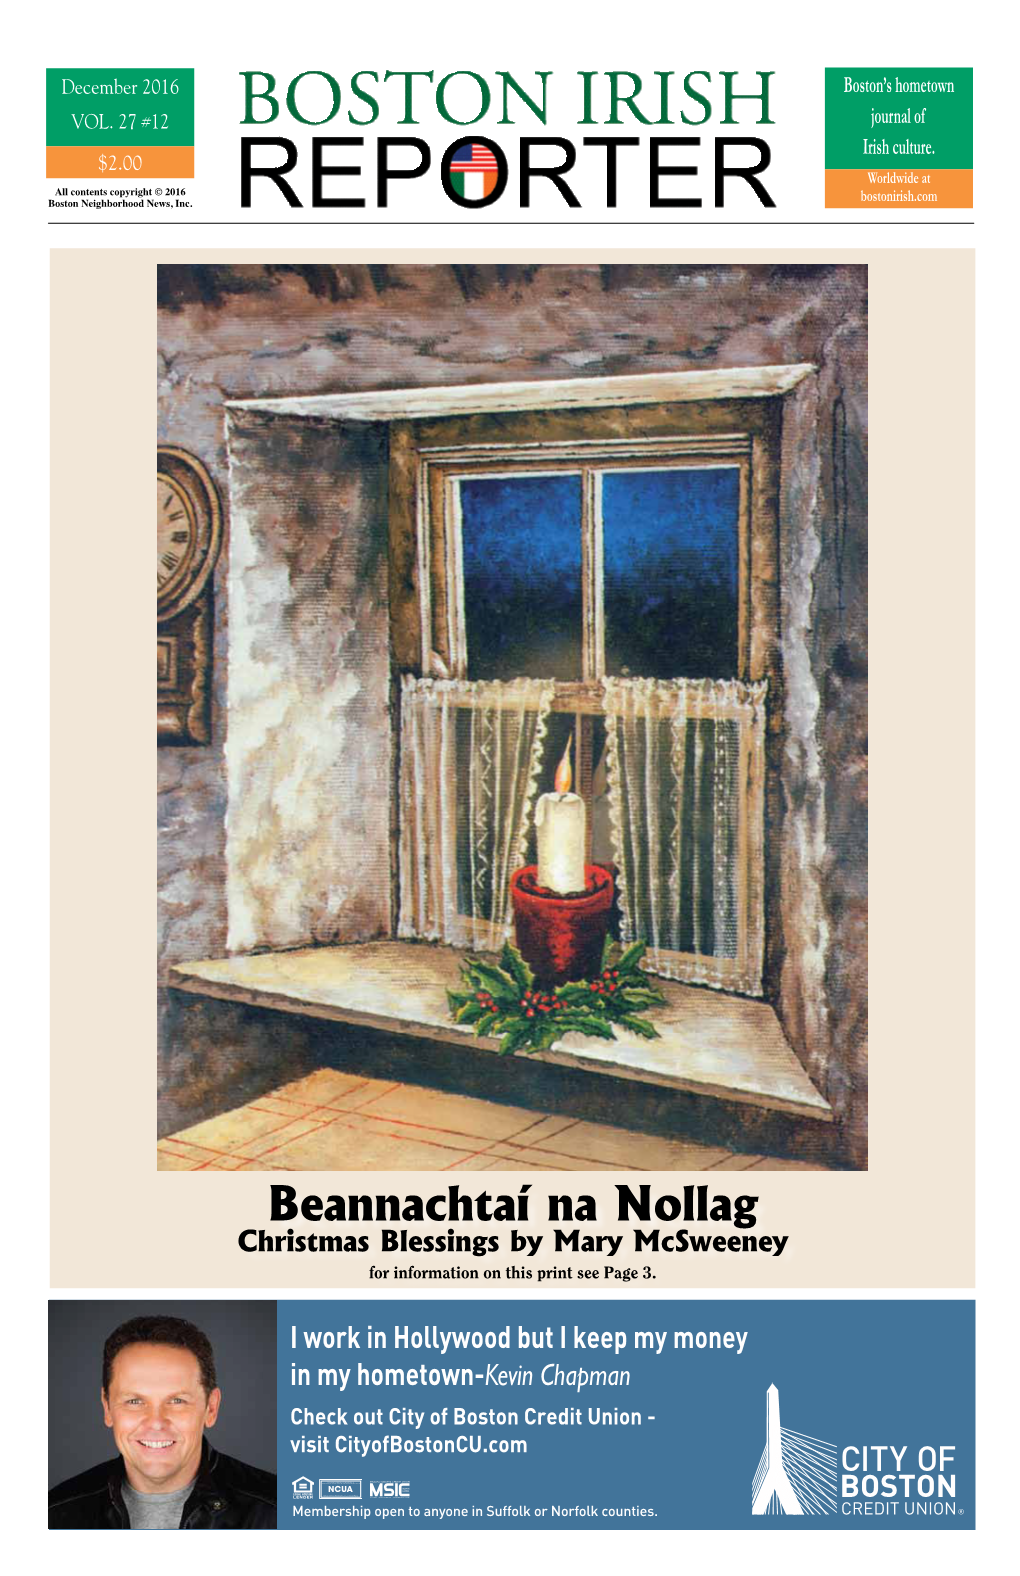 Beannachtaí Na Nollag Christmas Blessings by Mary Mcsweeney for Information on This Print See Page 3